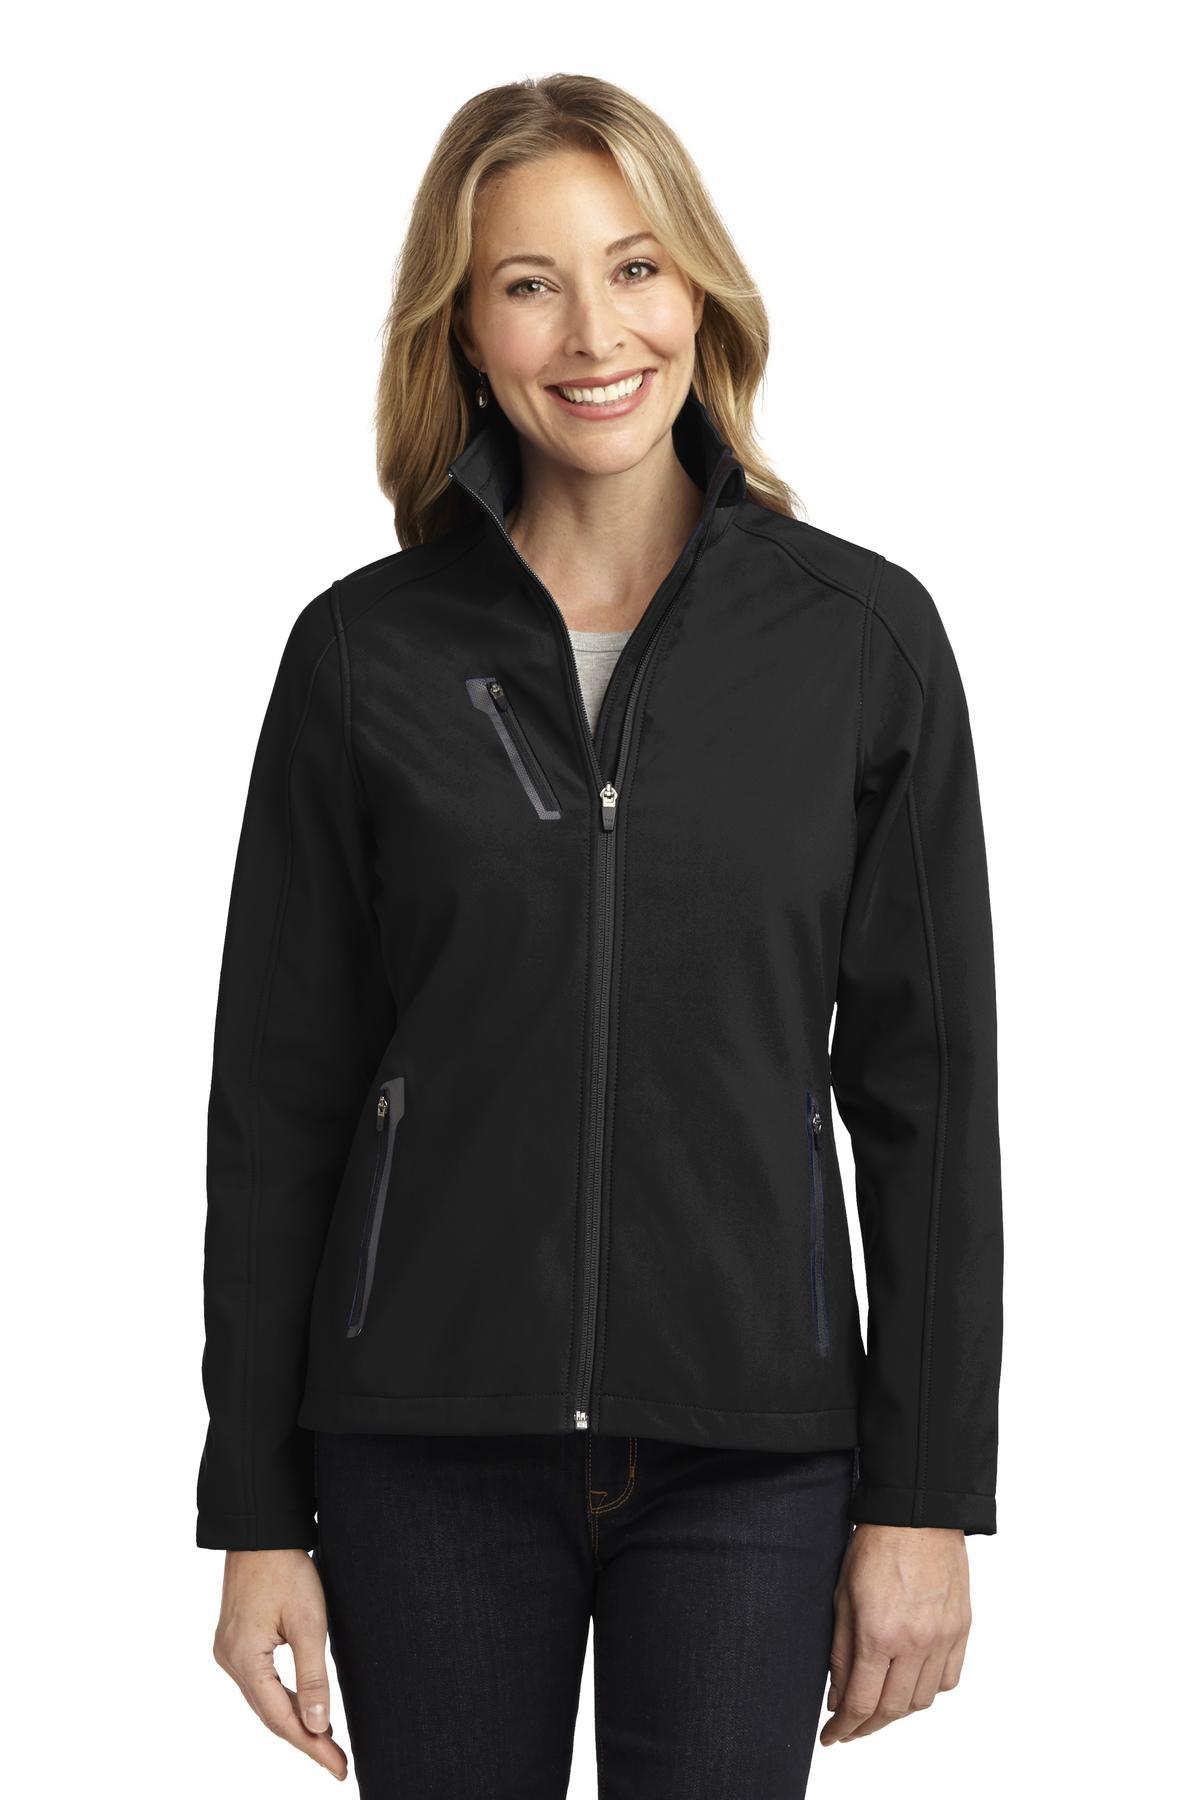 Port Authority Ladies Welded Soft Shell Jacket. L324 - Dresses Max